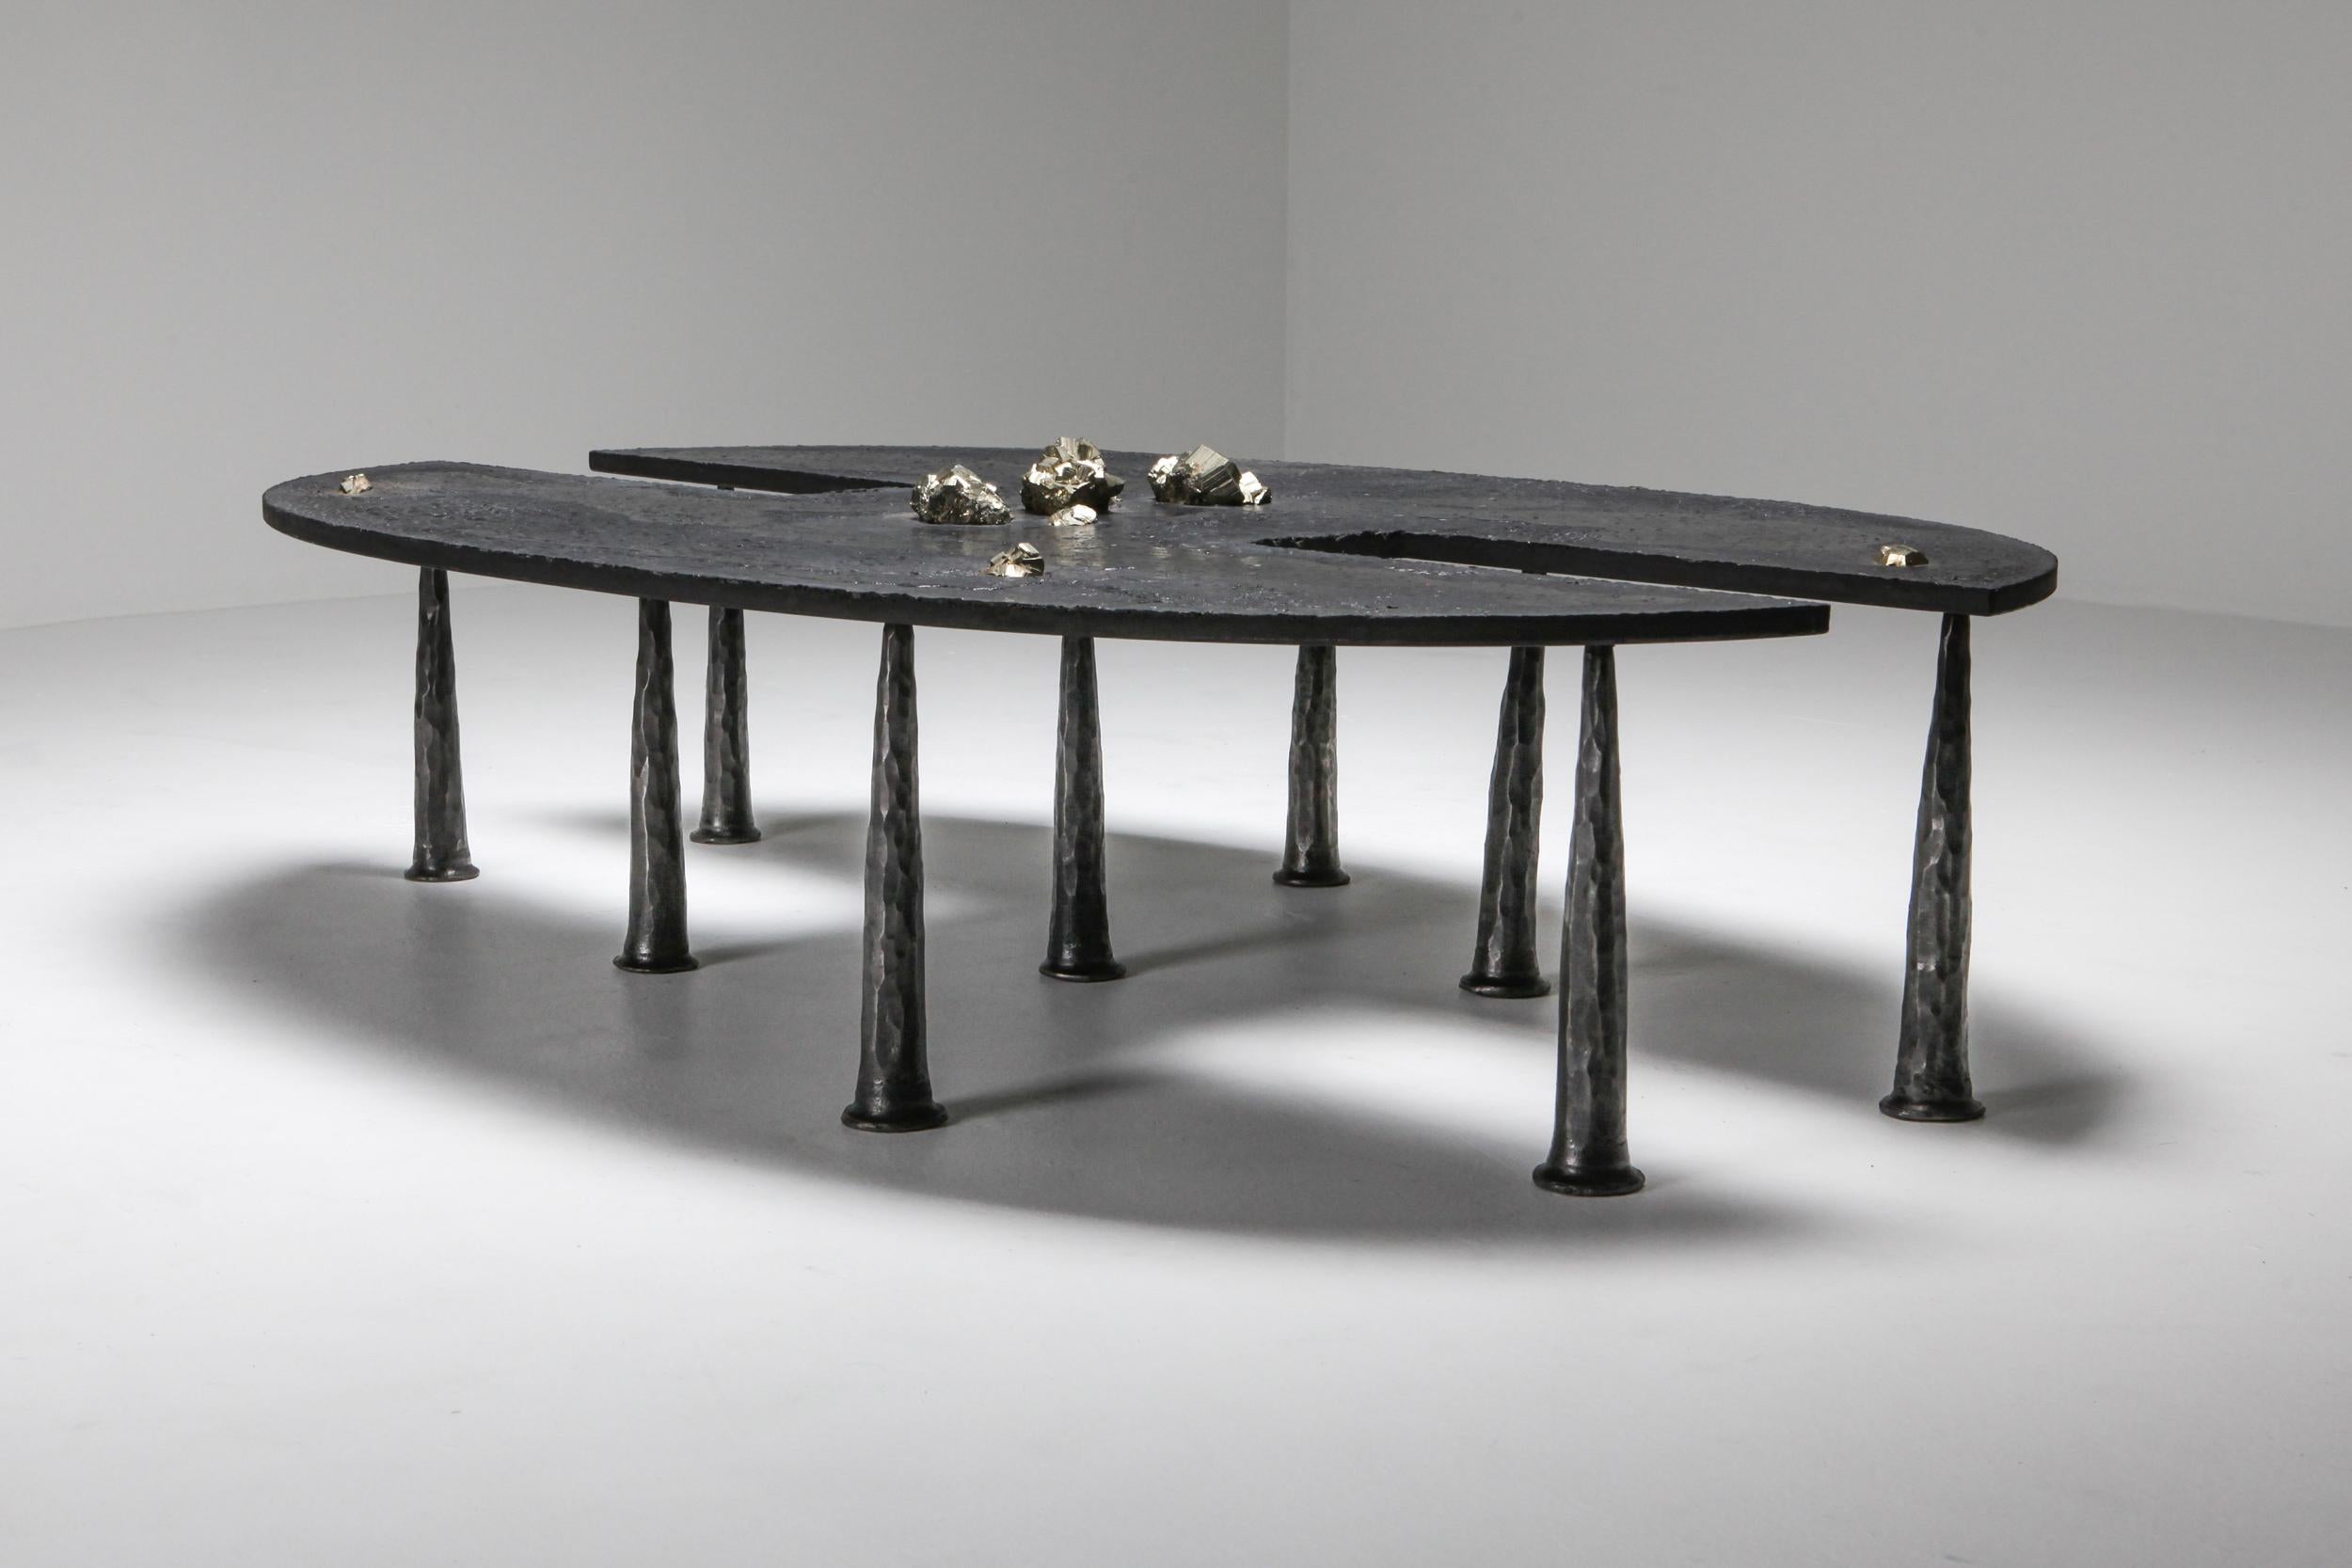 Belgian Brutalist Contemporary Coffee Table by Thomas Serruys